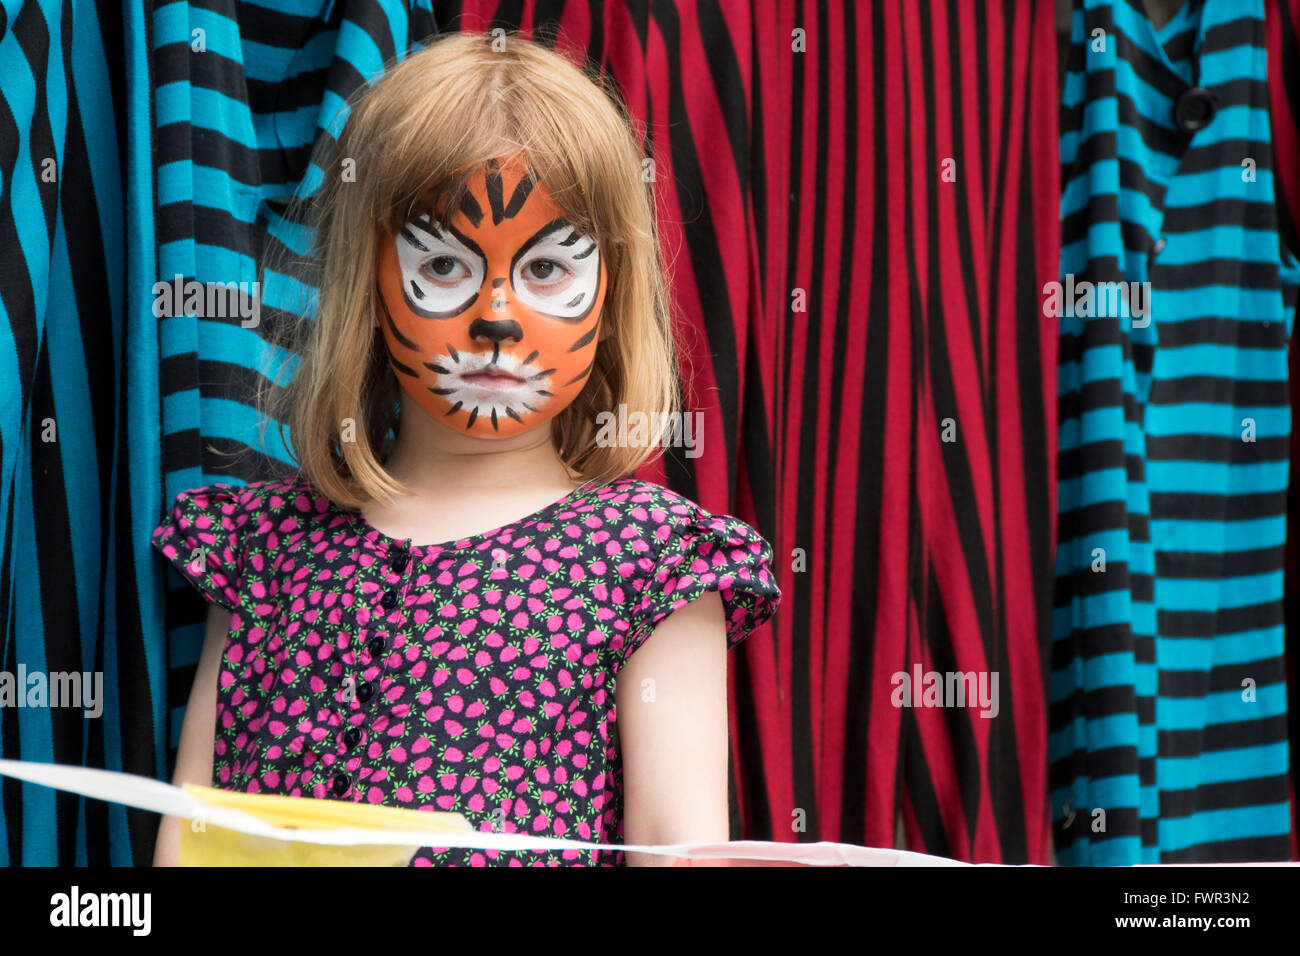 sad, face-paint abstract, tiger, action, actor, actress, adult, affect, anger, angry, art, arty, beauty, blue, alamy, casual kid Stock Photo